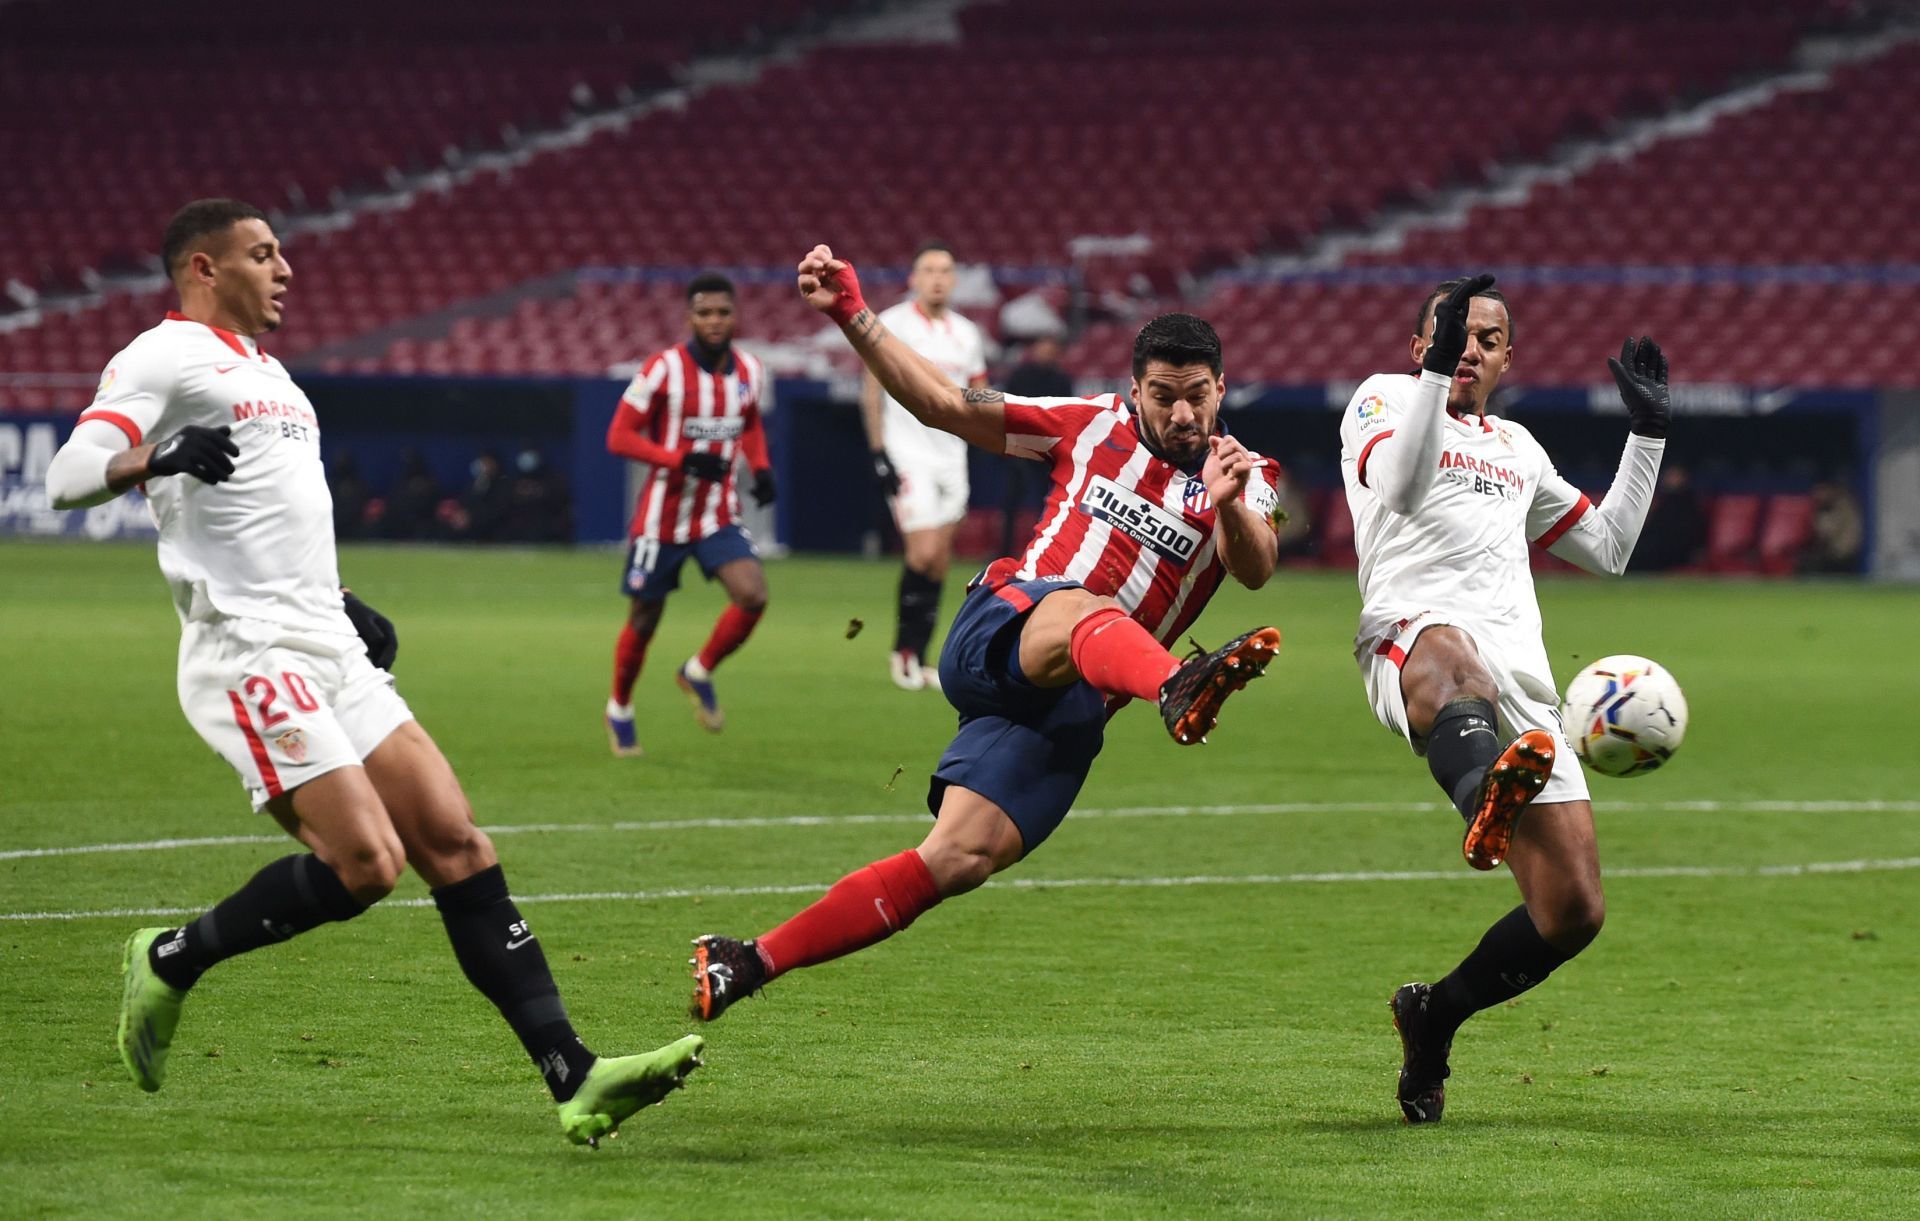 Atletico Madrid take on Sevilla this weekend